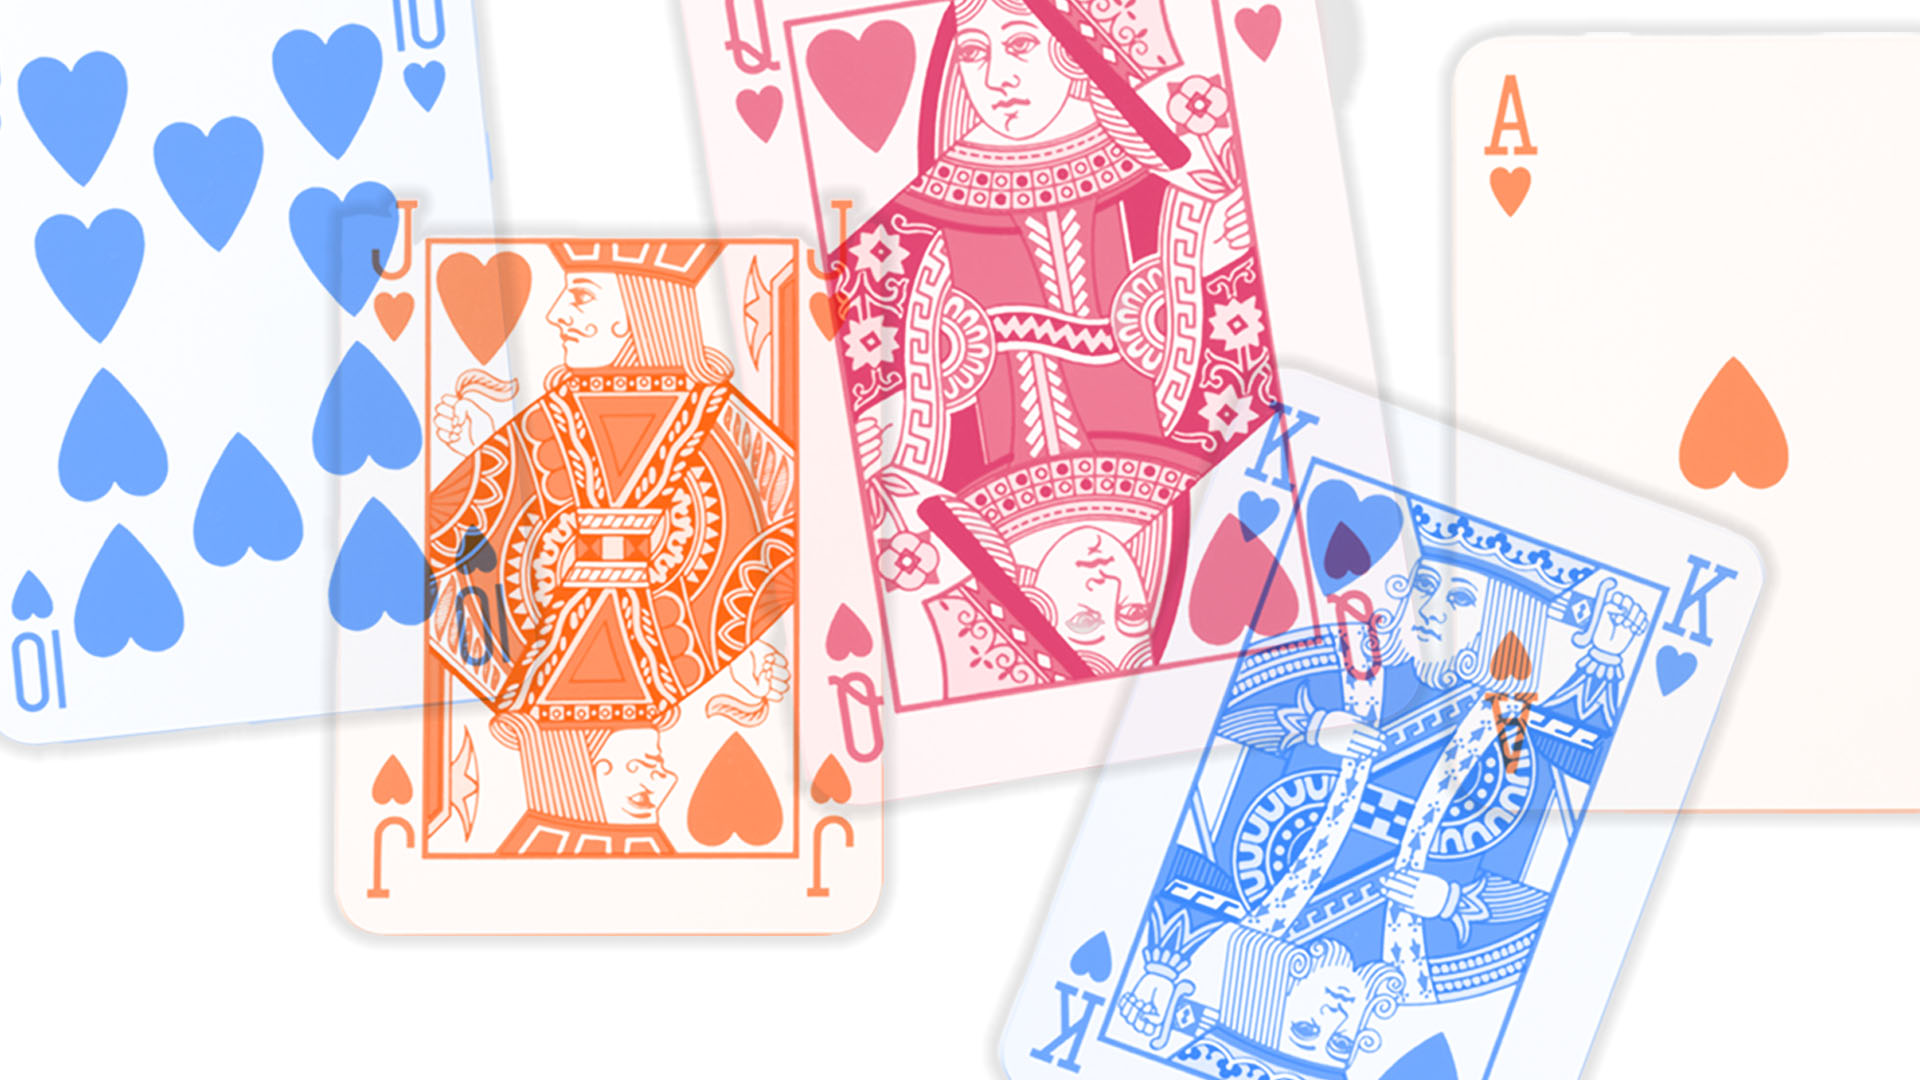 Solitaire, Classic Card Game, Rules & Strategy